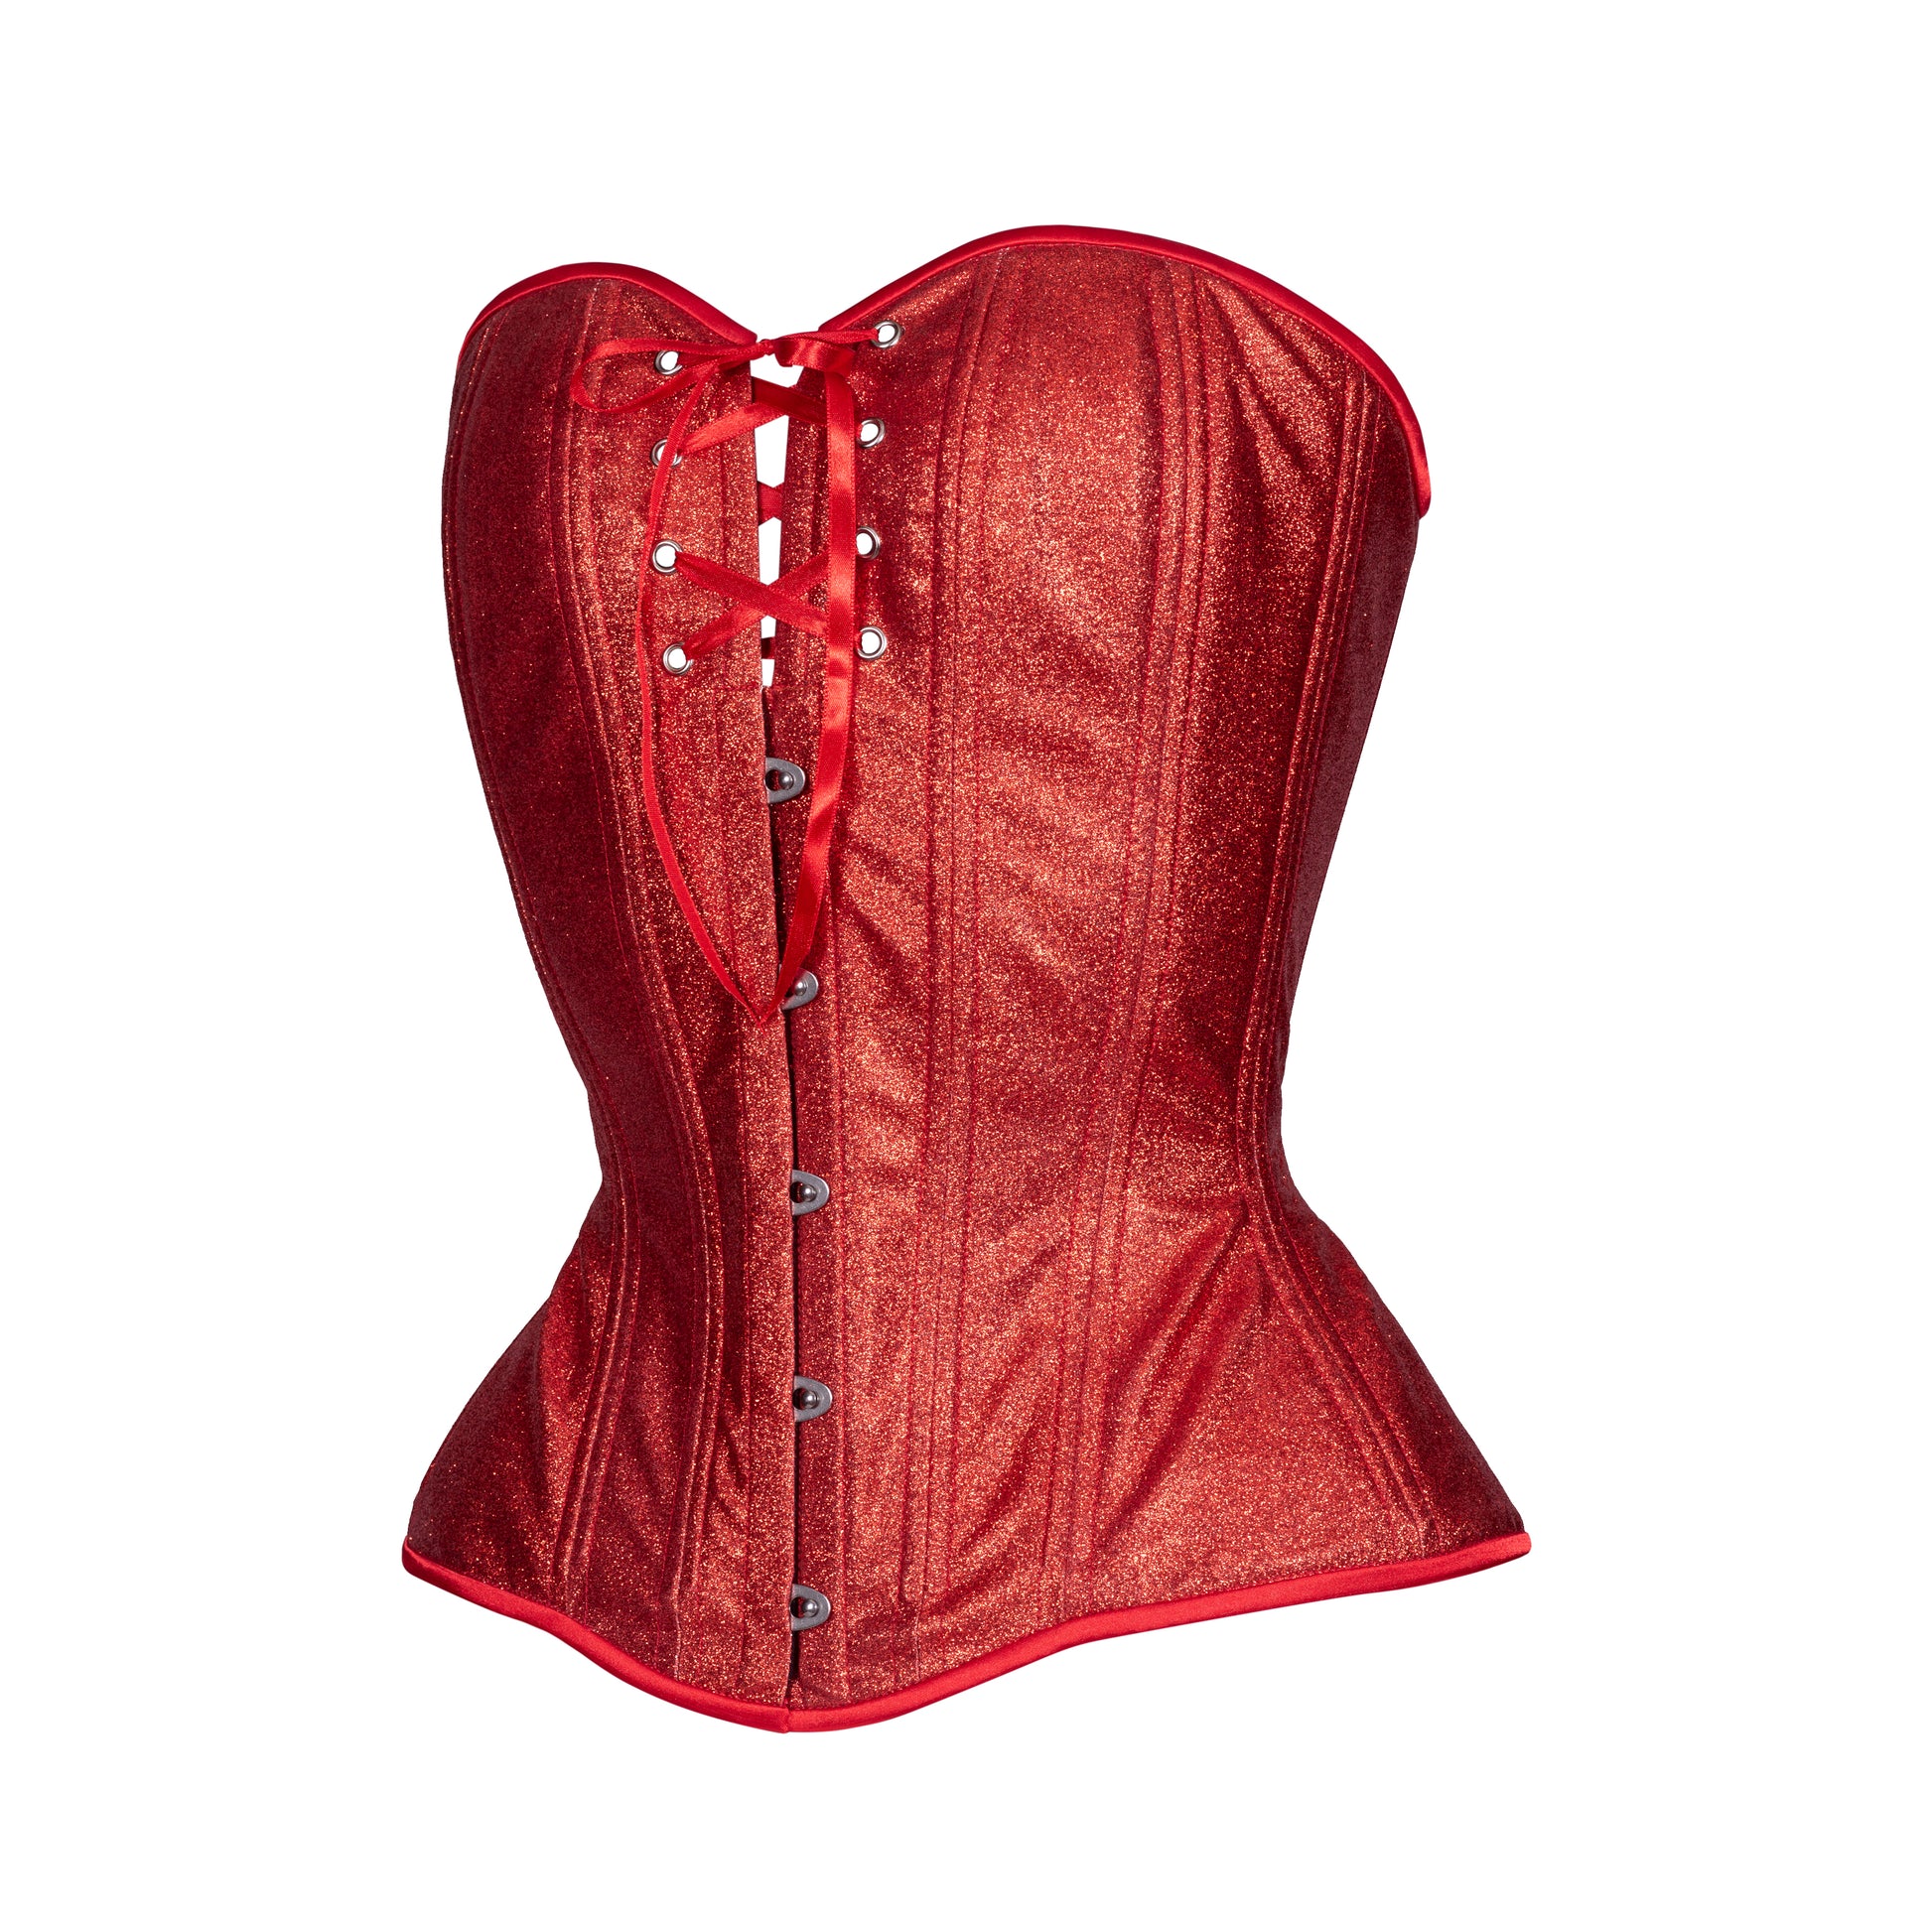 Corset Styles: How Will a Corset Look on You? - Hourglass Angel